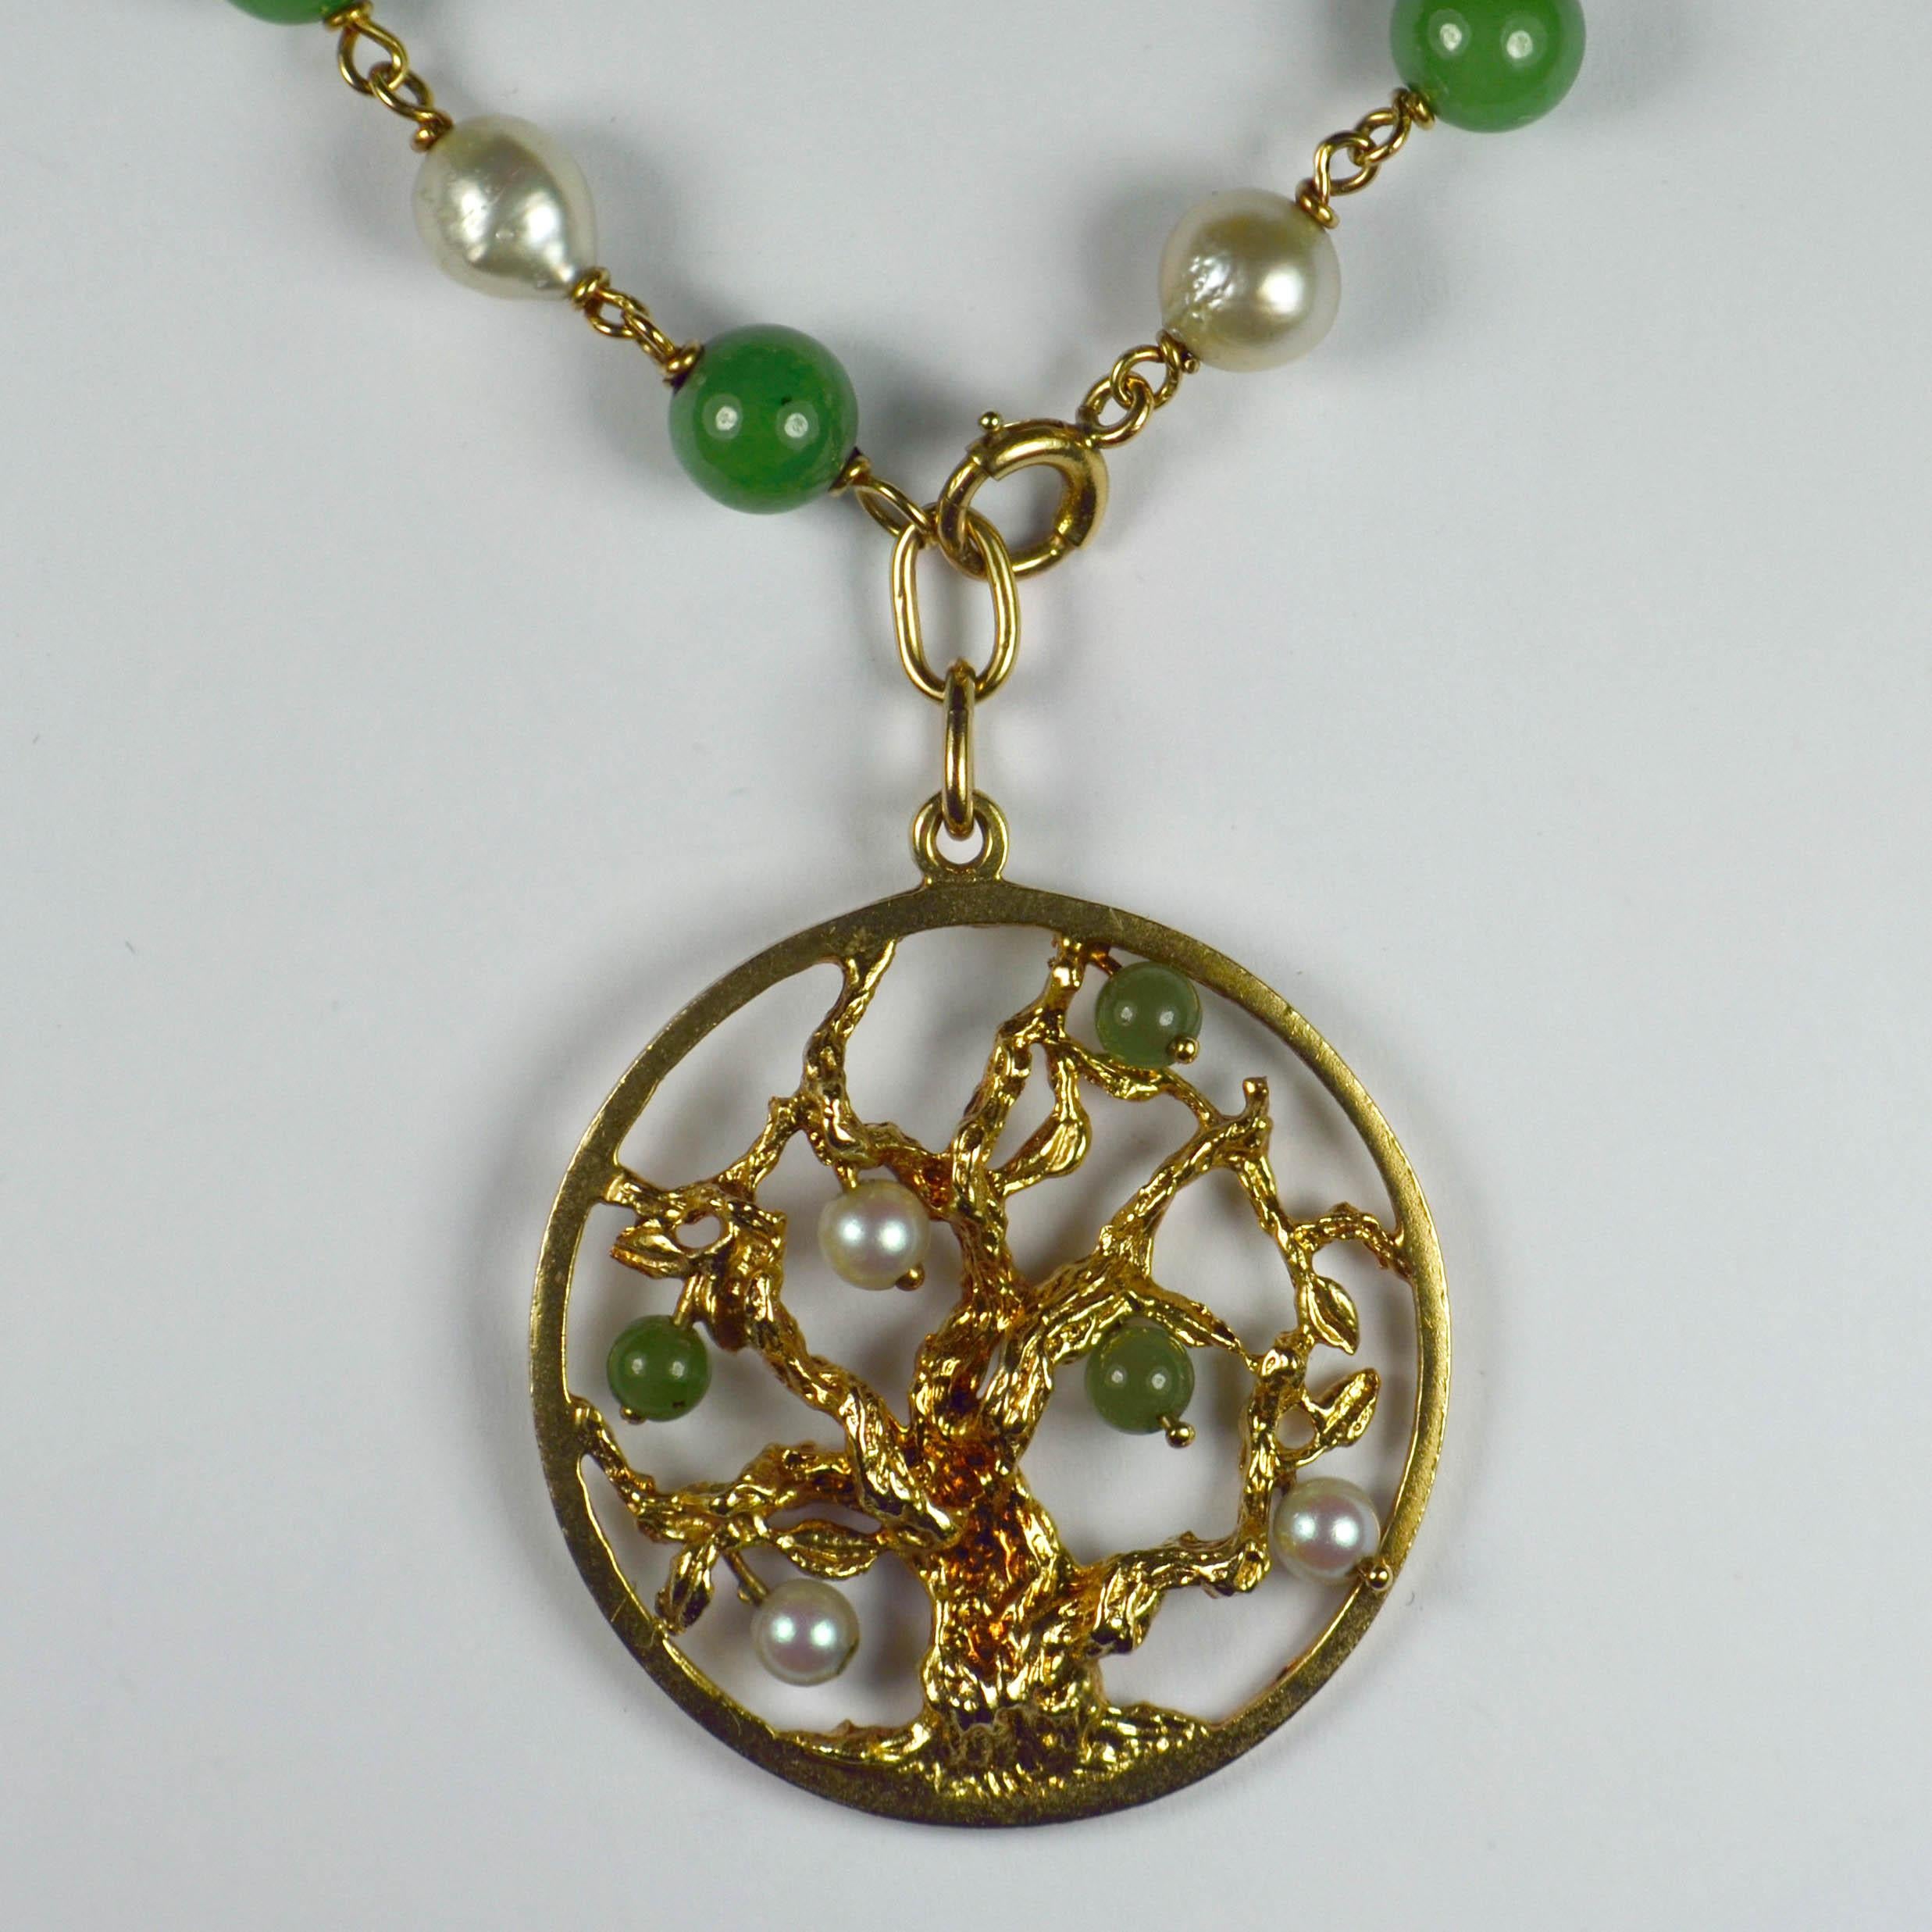 A 14 karat yellow gold charm bracelet with a dangling charm pendant designed as a tree of life set with green nephrite jade beads and white cultured pearls. The bracelet is set with 14 alternating beads of nephrite and white cultured pearl with an